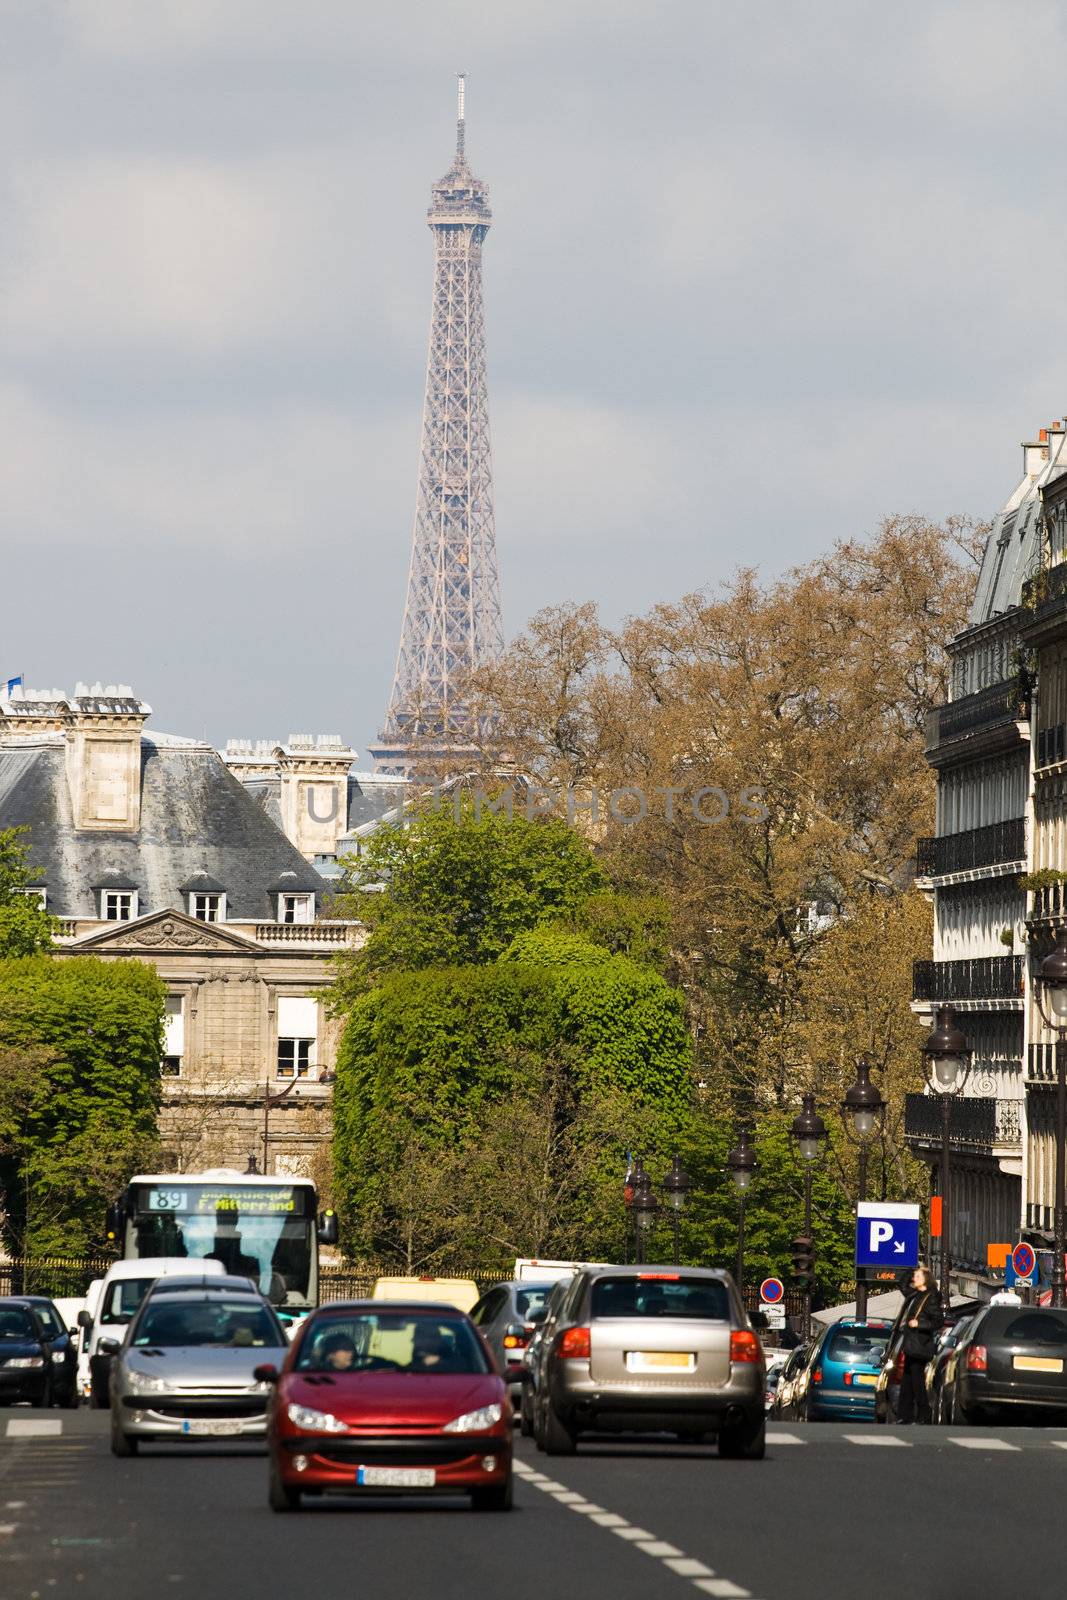 Street with cars in Paris, Latin quartal. Eiffel tower in background.